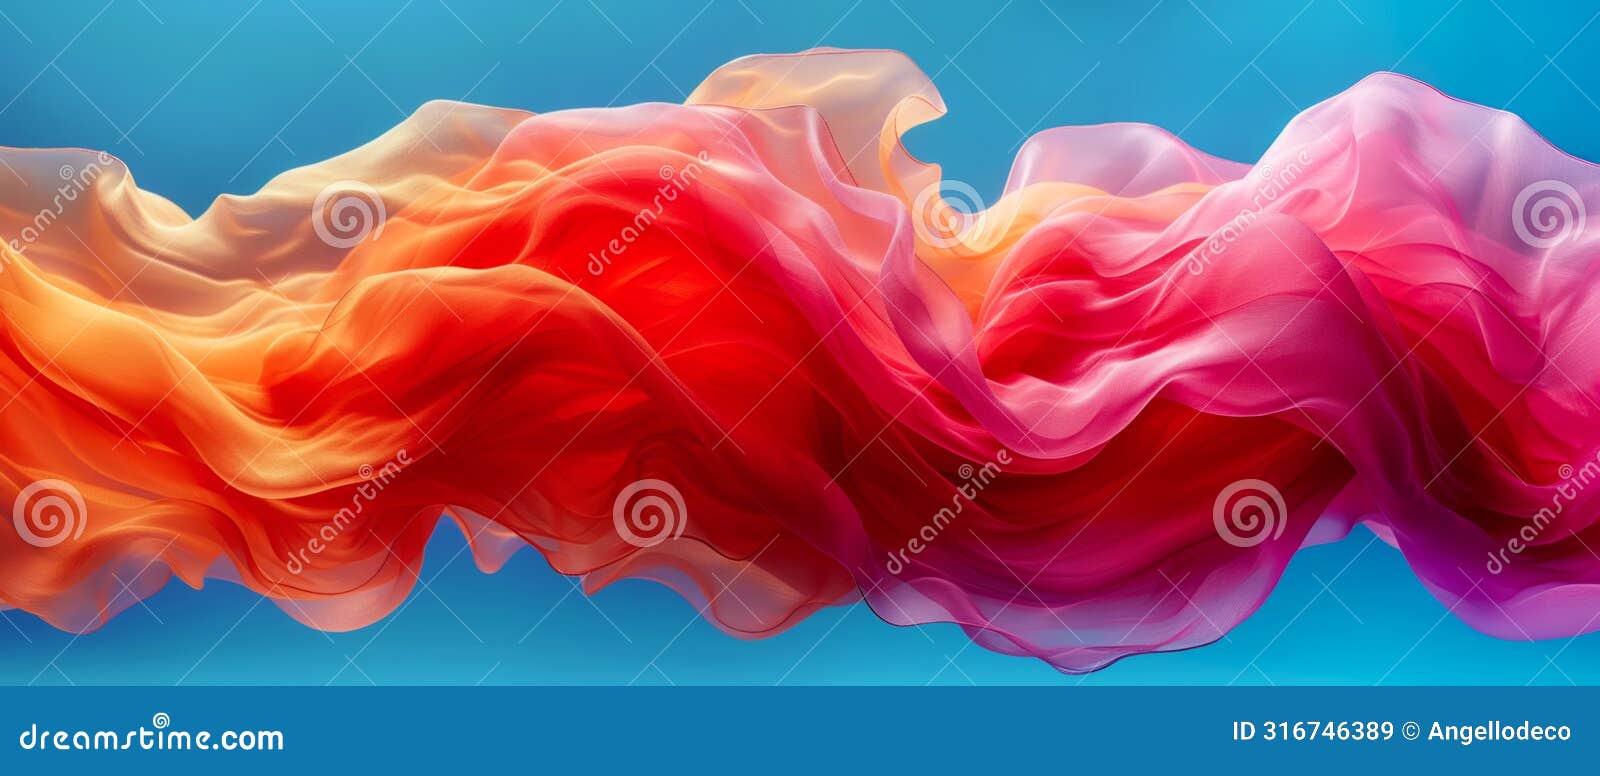 fabric waves in ethereal dynamic flow of warm and cool tones